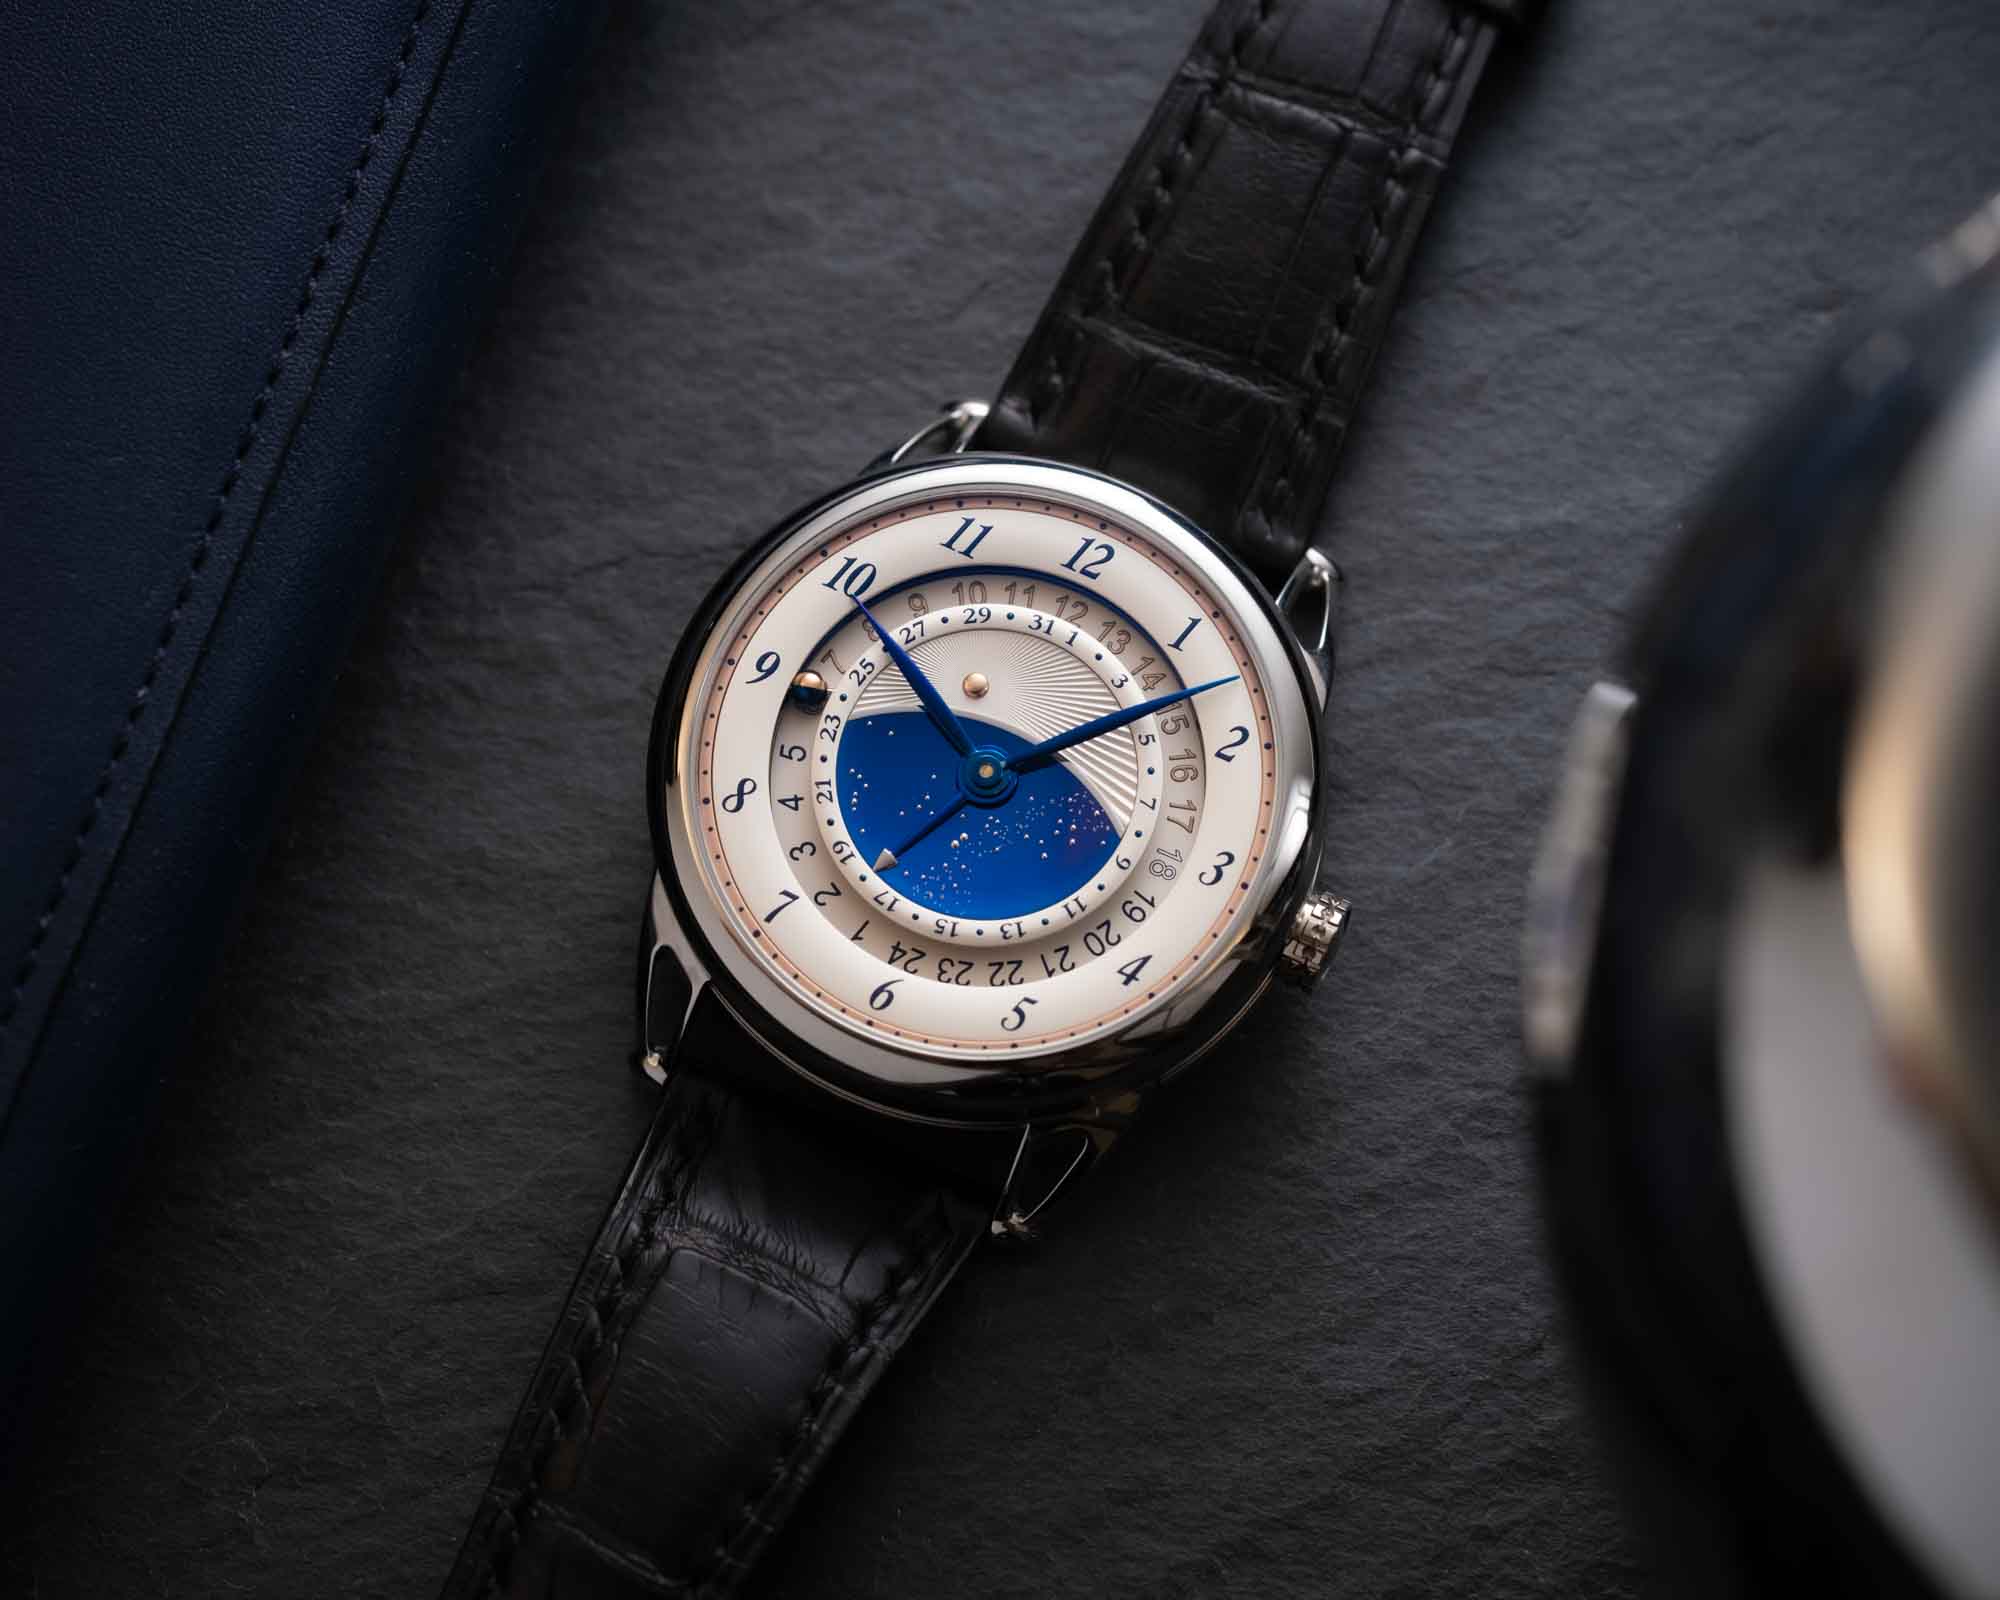 The dial draws inspiration from the starry sky